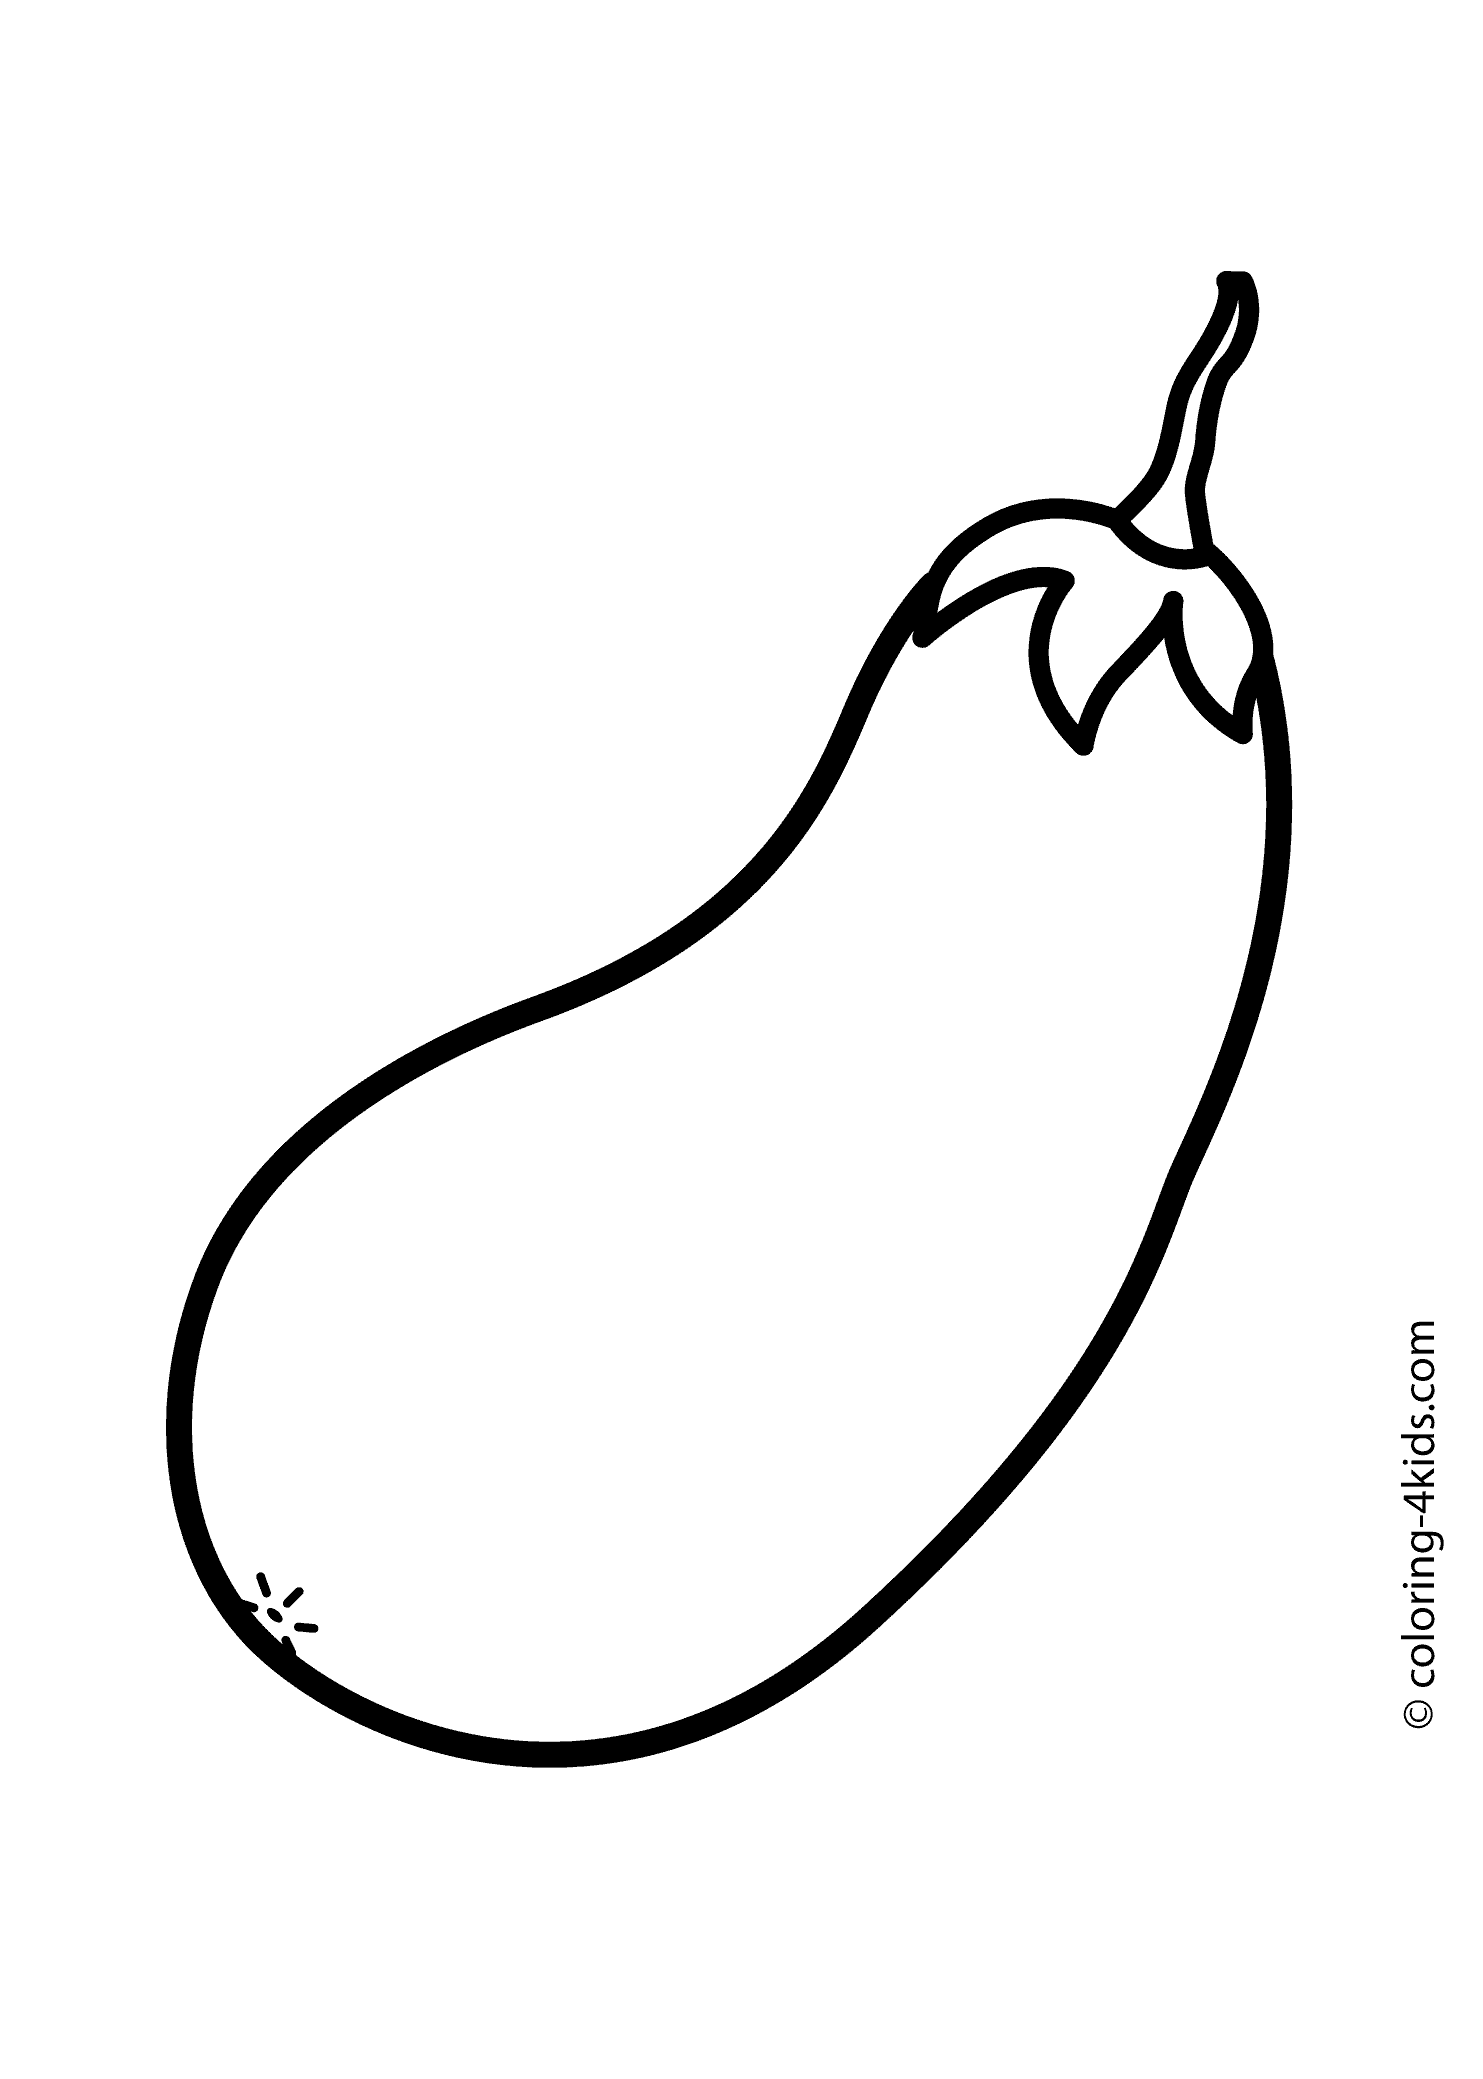 Marrow squash vegetable coloring page for kids, printable | coloing-